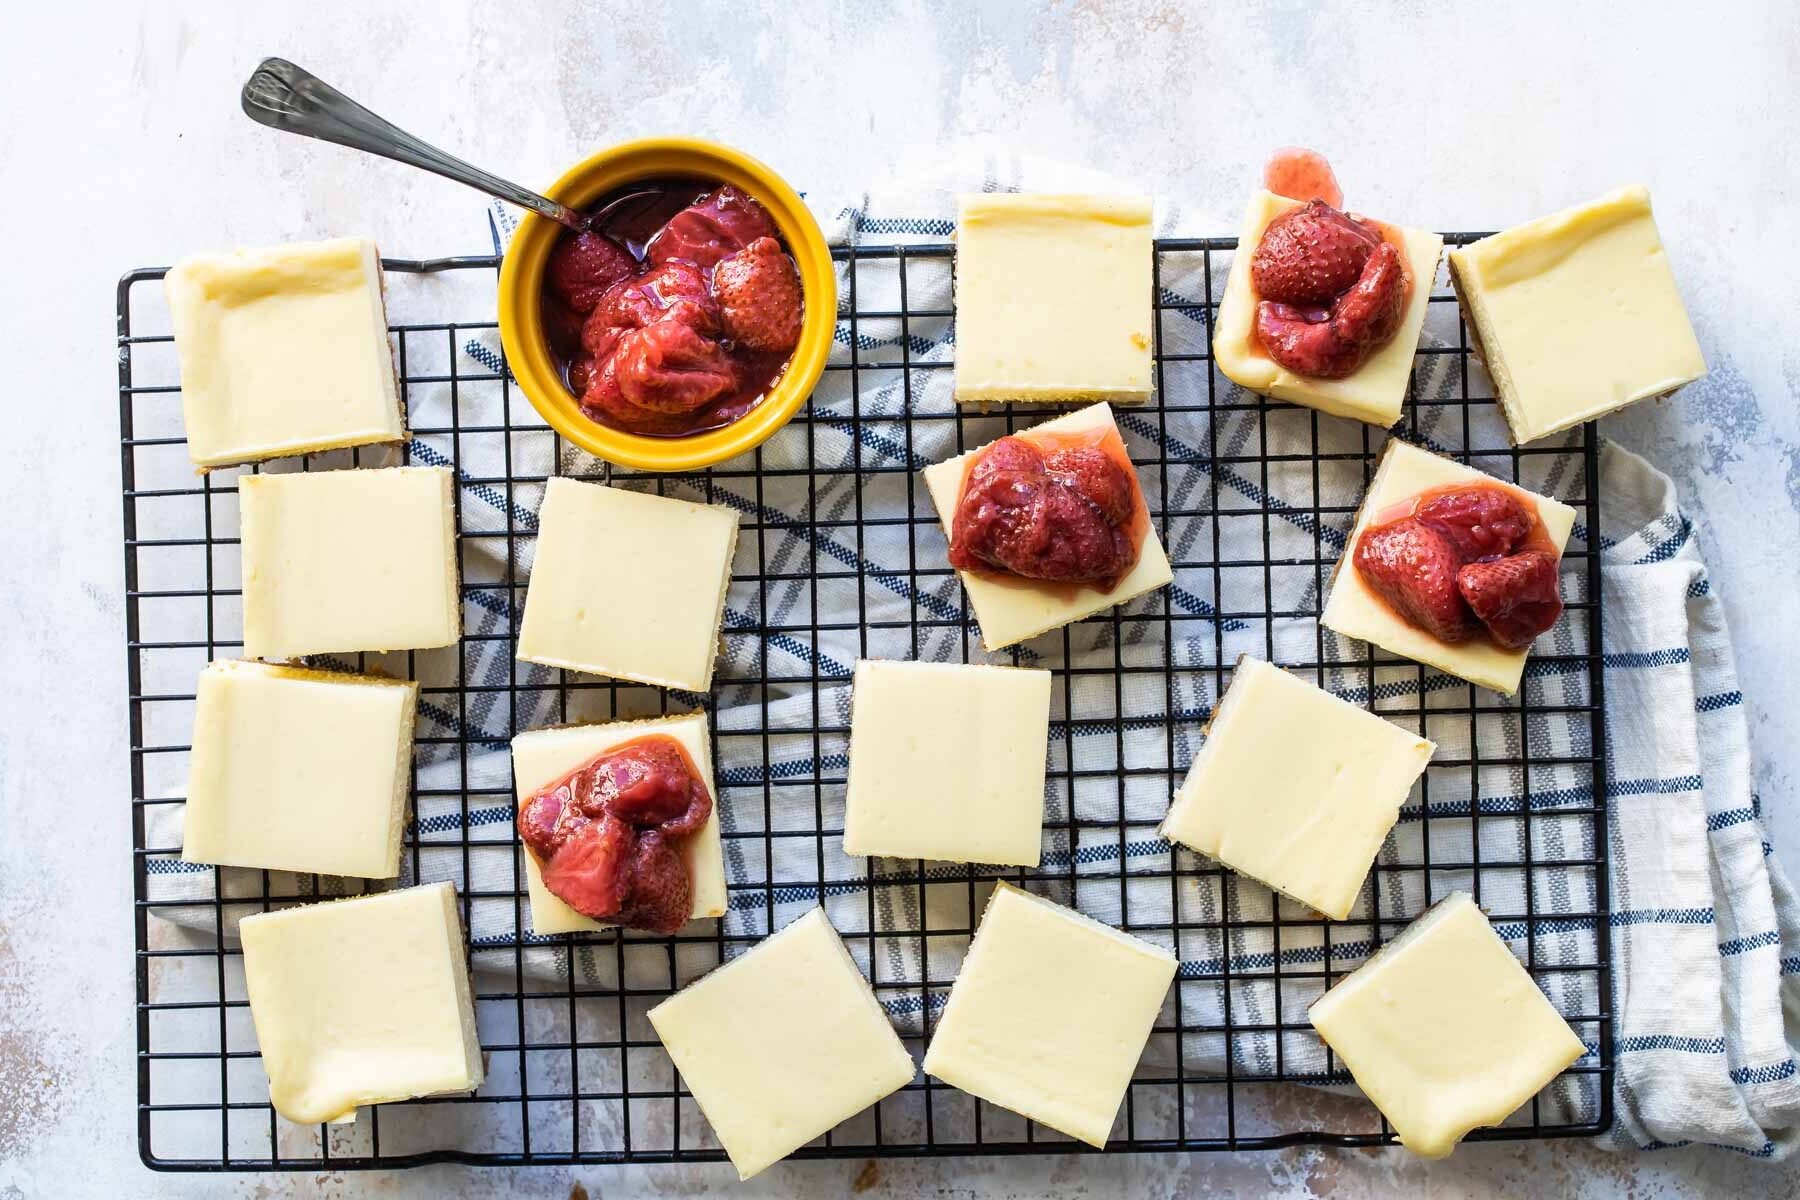 Cheesecake squares topped with strawberry topping on a cooling rack.